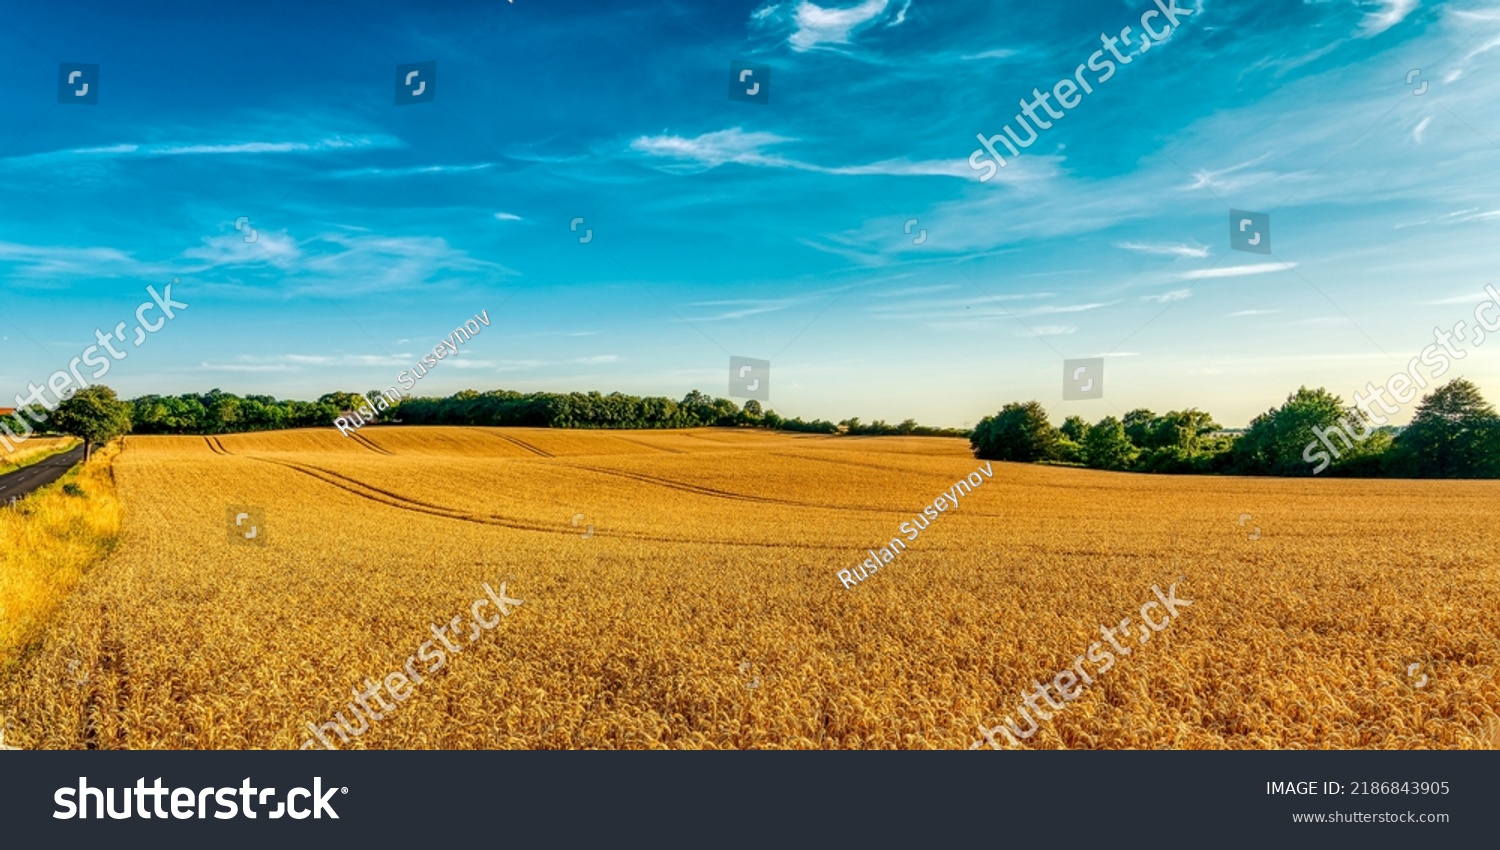 Panorama of an agriculture wheat field. Wheat field on an agriculture farm #2186843905